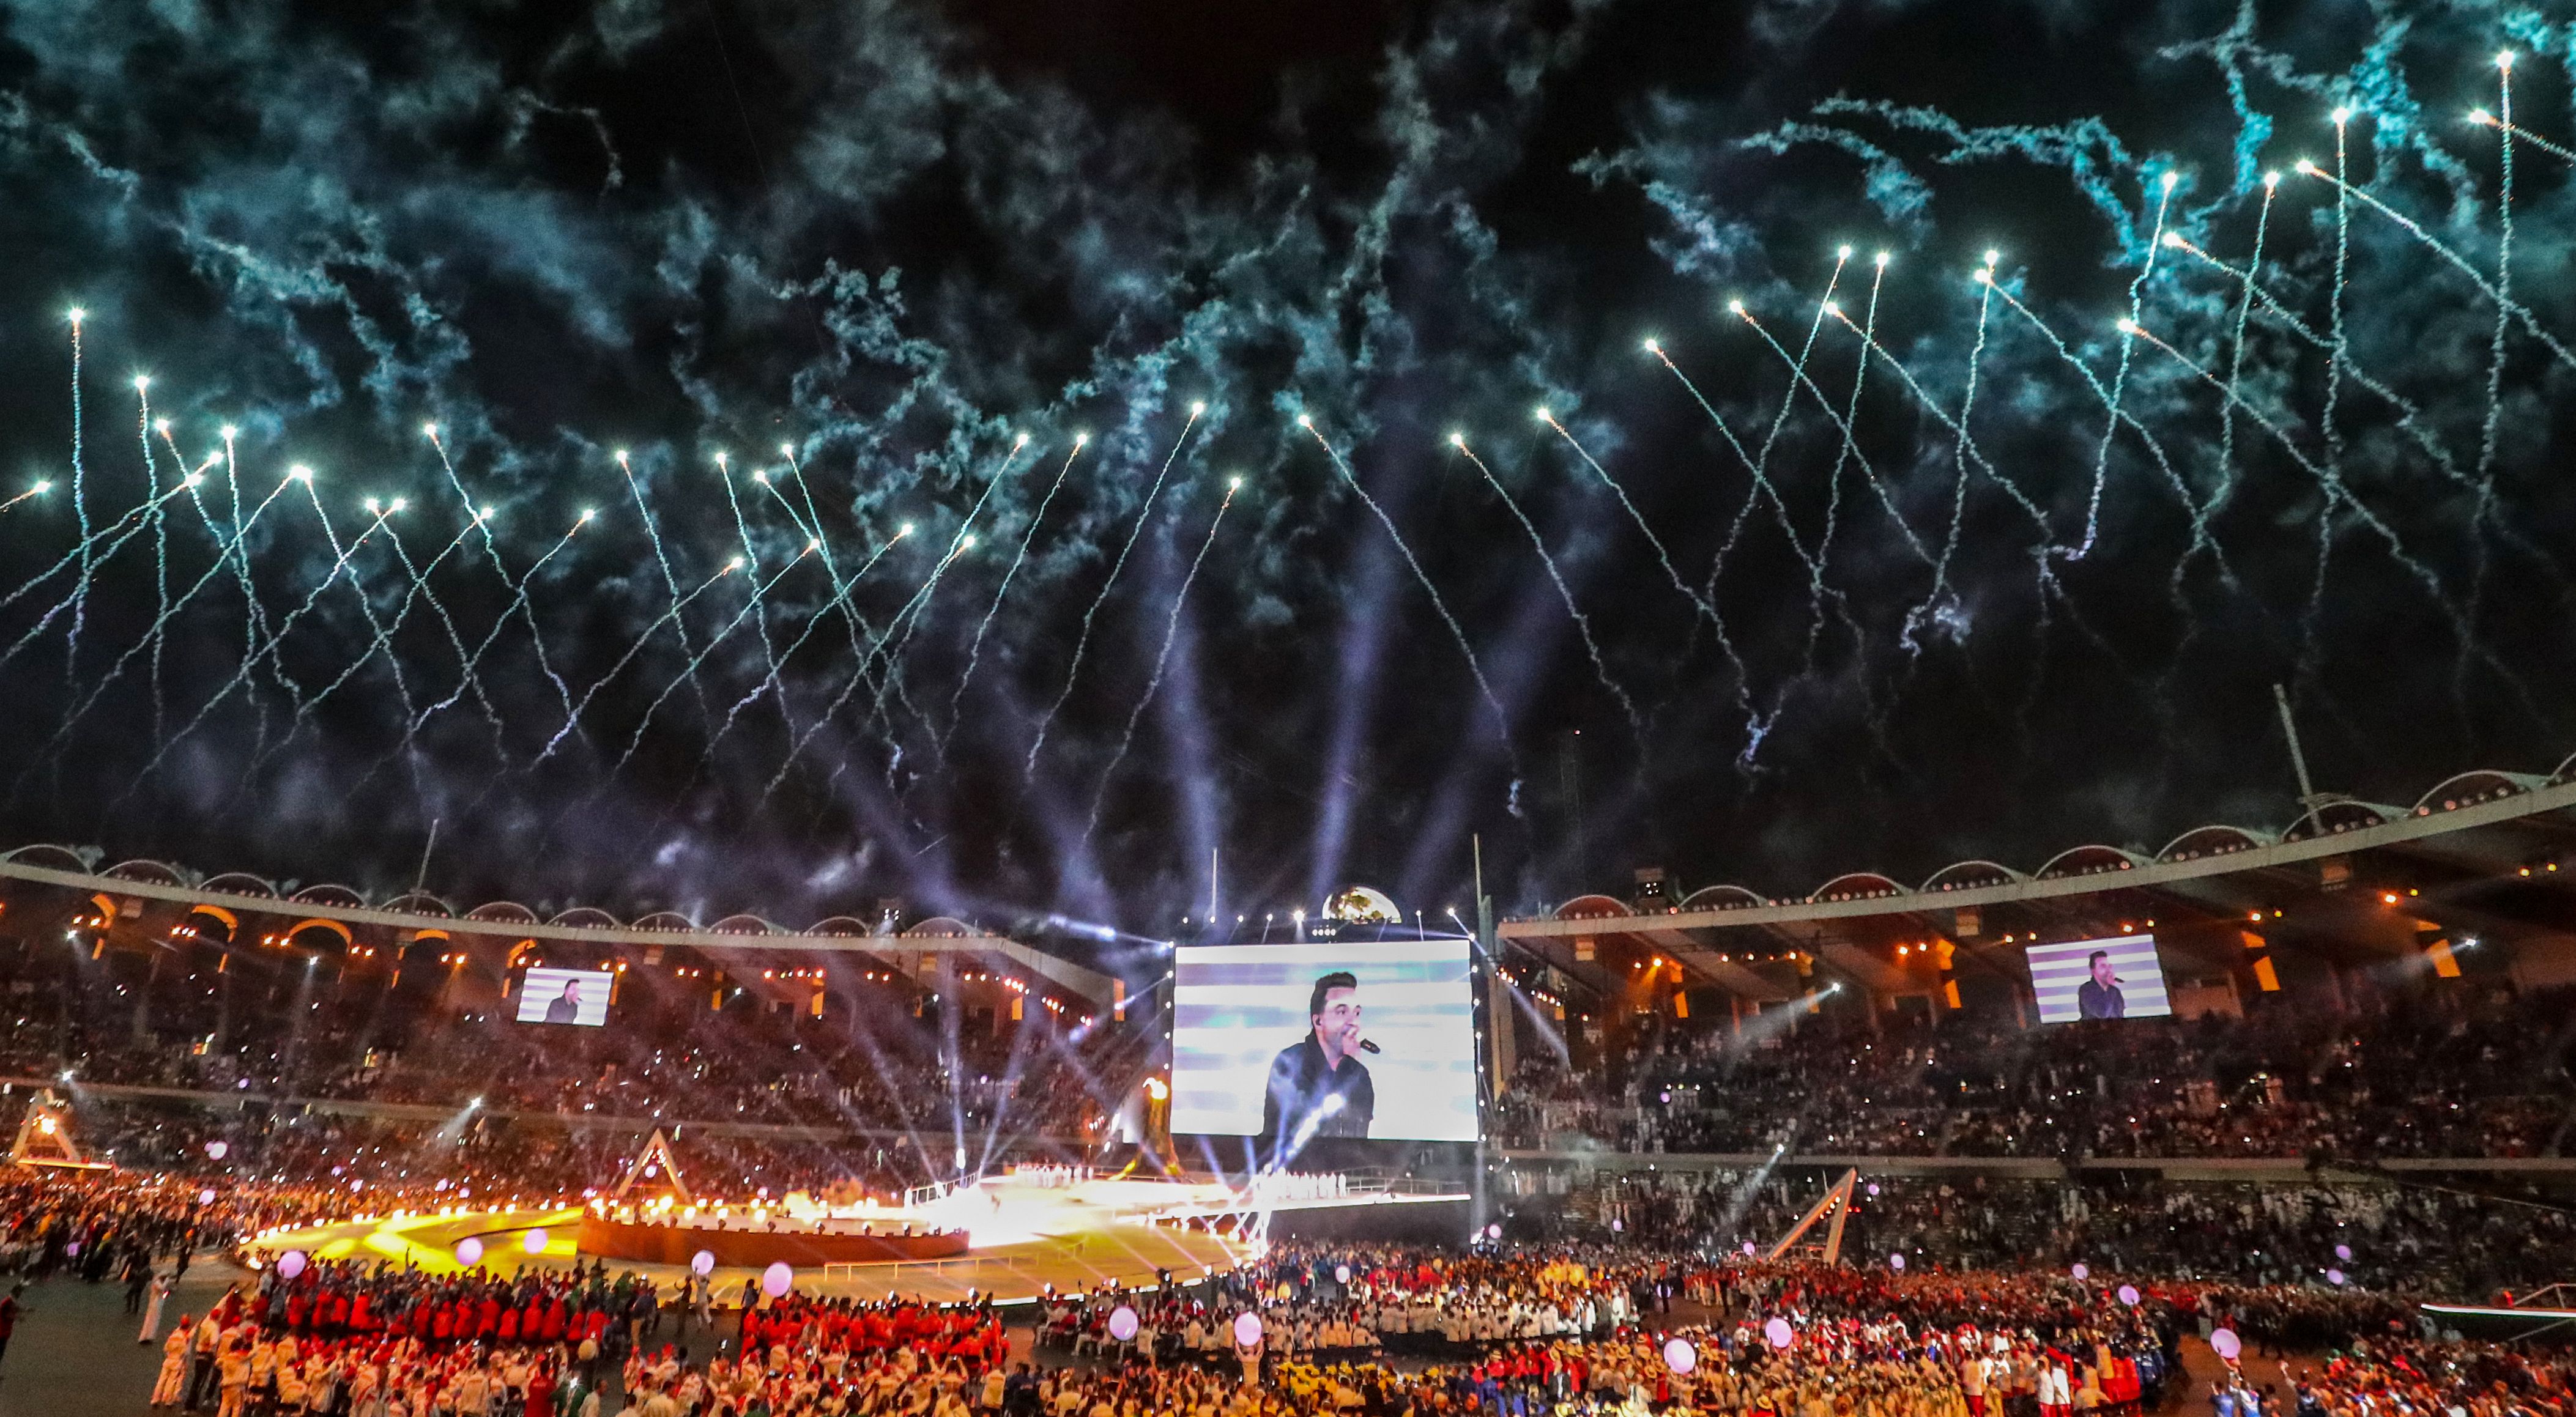 Abu Dhabi puts on spectacular show as Special Olympics opens